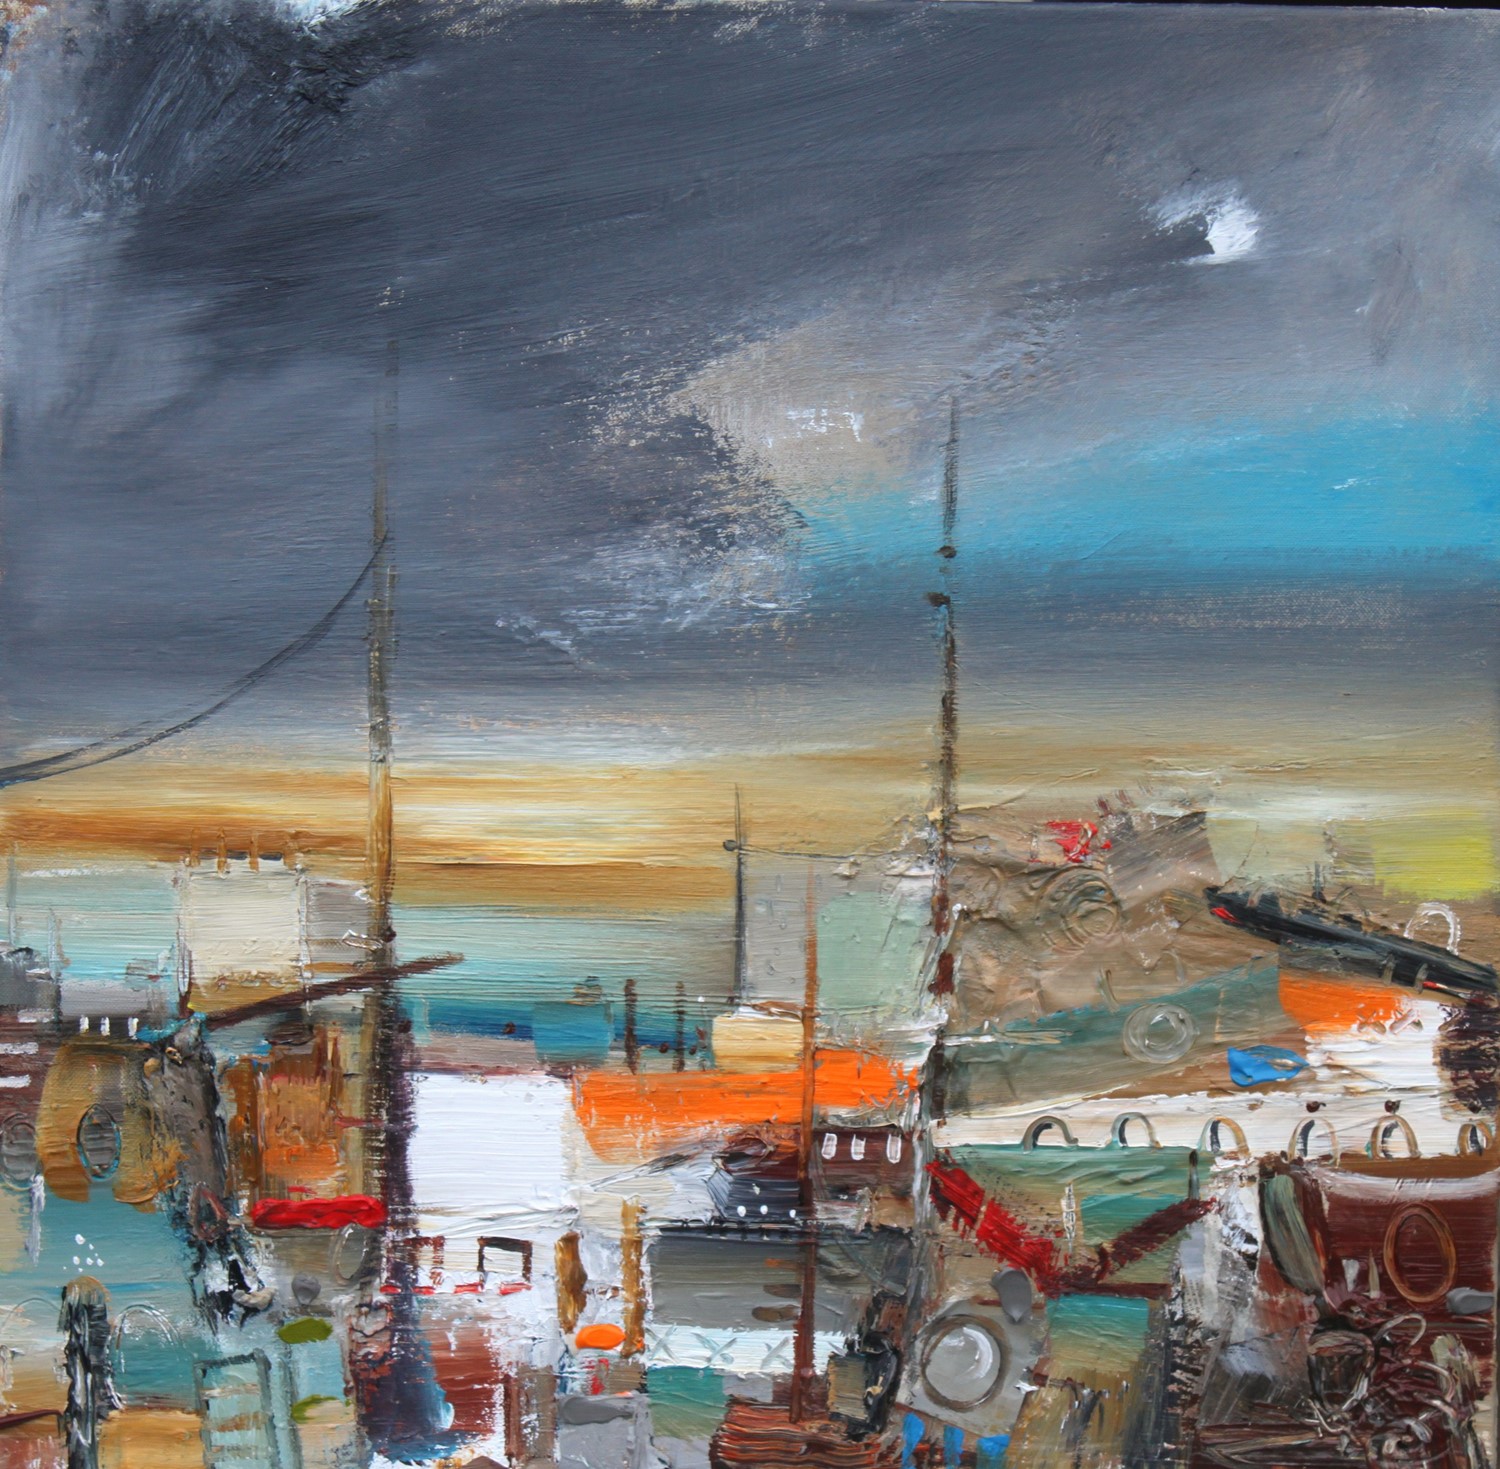 'Night setting on at the harbour' by artist Rosanne Barr